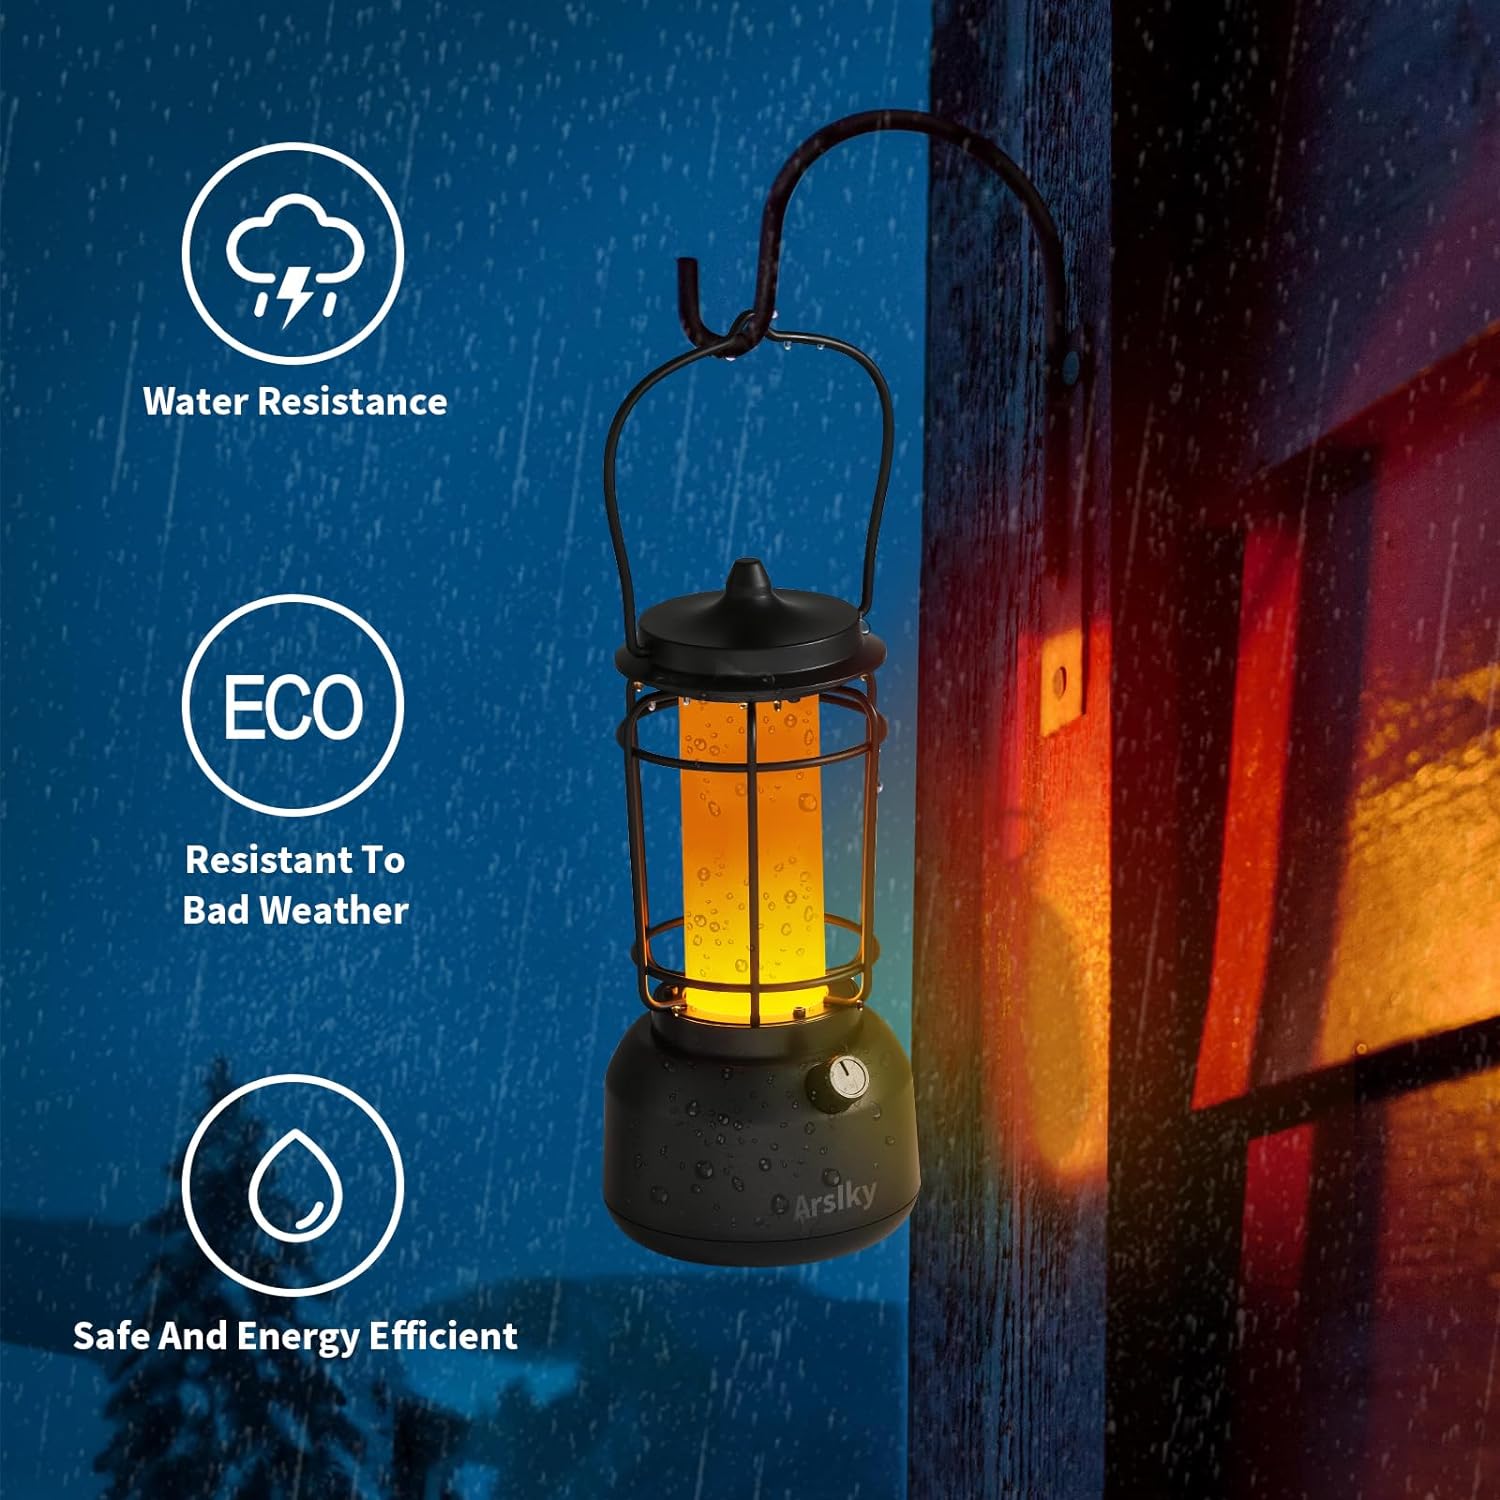 Outdoor Lights,Porch Lights,Arslly Flickering Flames Outdoor Lanterns for Patio Waterproof Wall Lights USB Rechargeable Type C Output,LED Camping Lantern for Home Party Garden with Free Hook